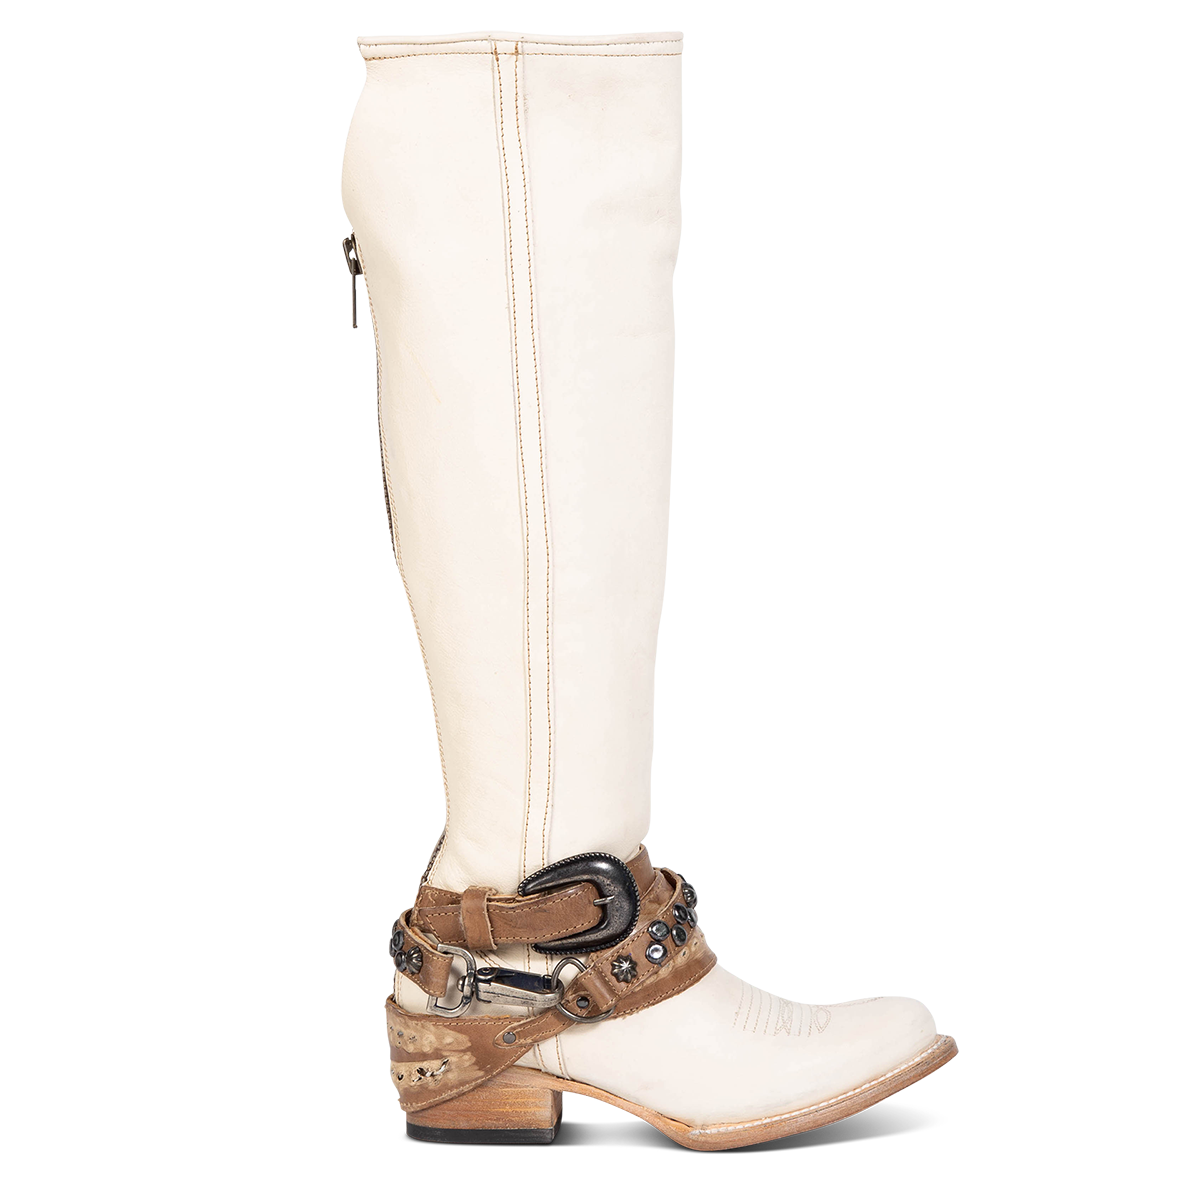 FREEBIRD women's Rodondo beige boot featuring a a relaxed silhouette, low heel, and mixed metal buckles